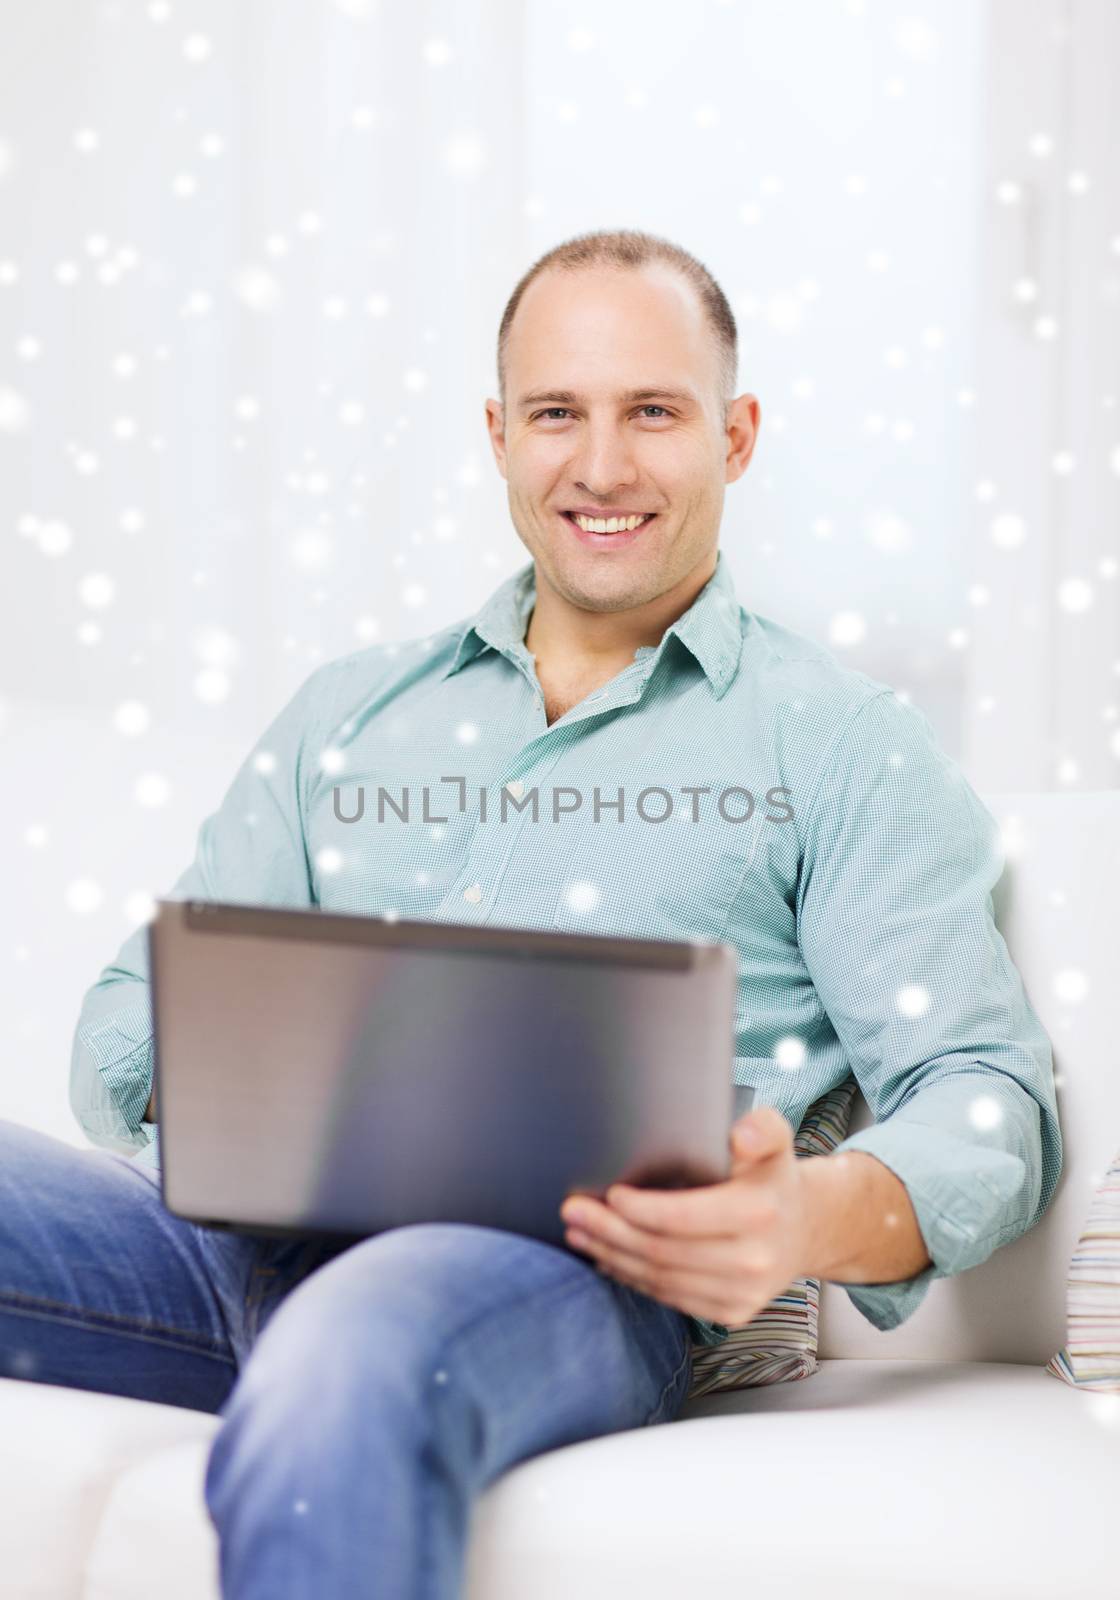 technology, business and lifestyle concept - smiling man working with laptop at home